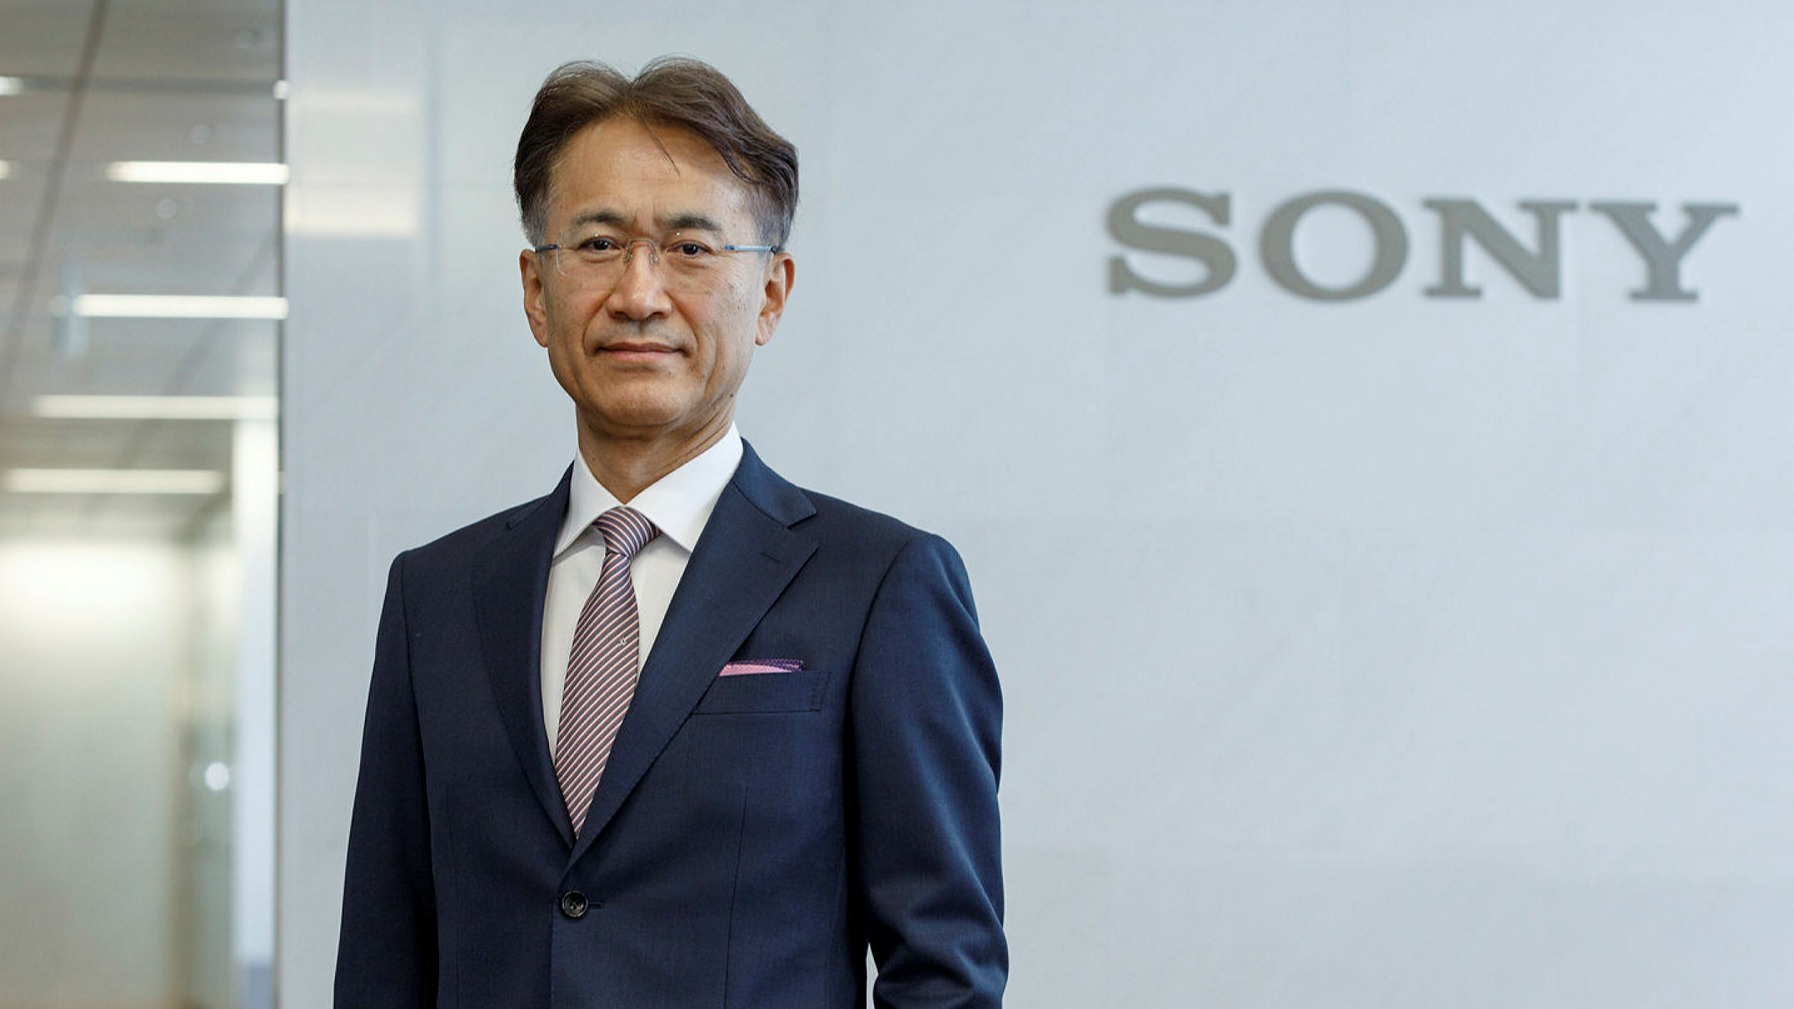 Sony boss shows a passion for social purpose | Financial Times